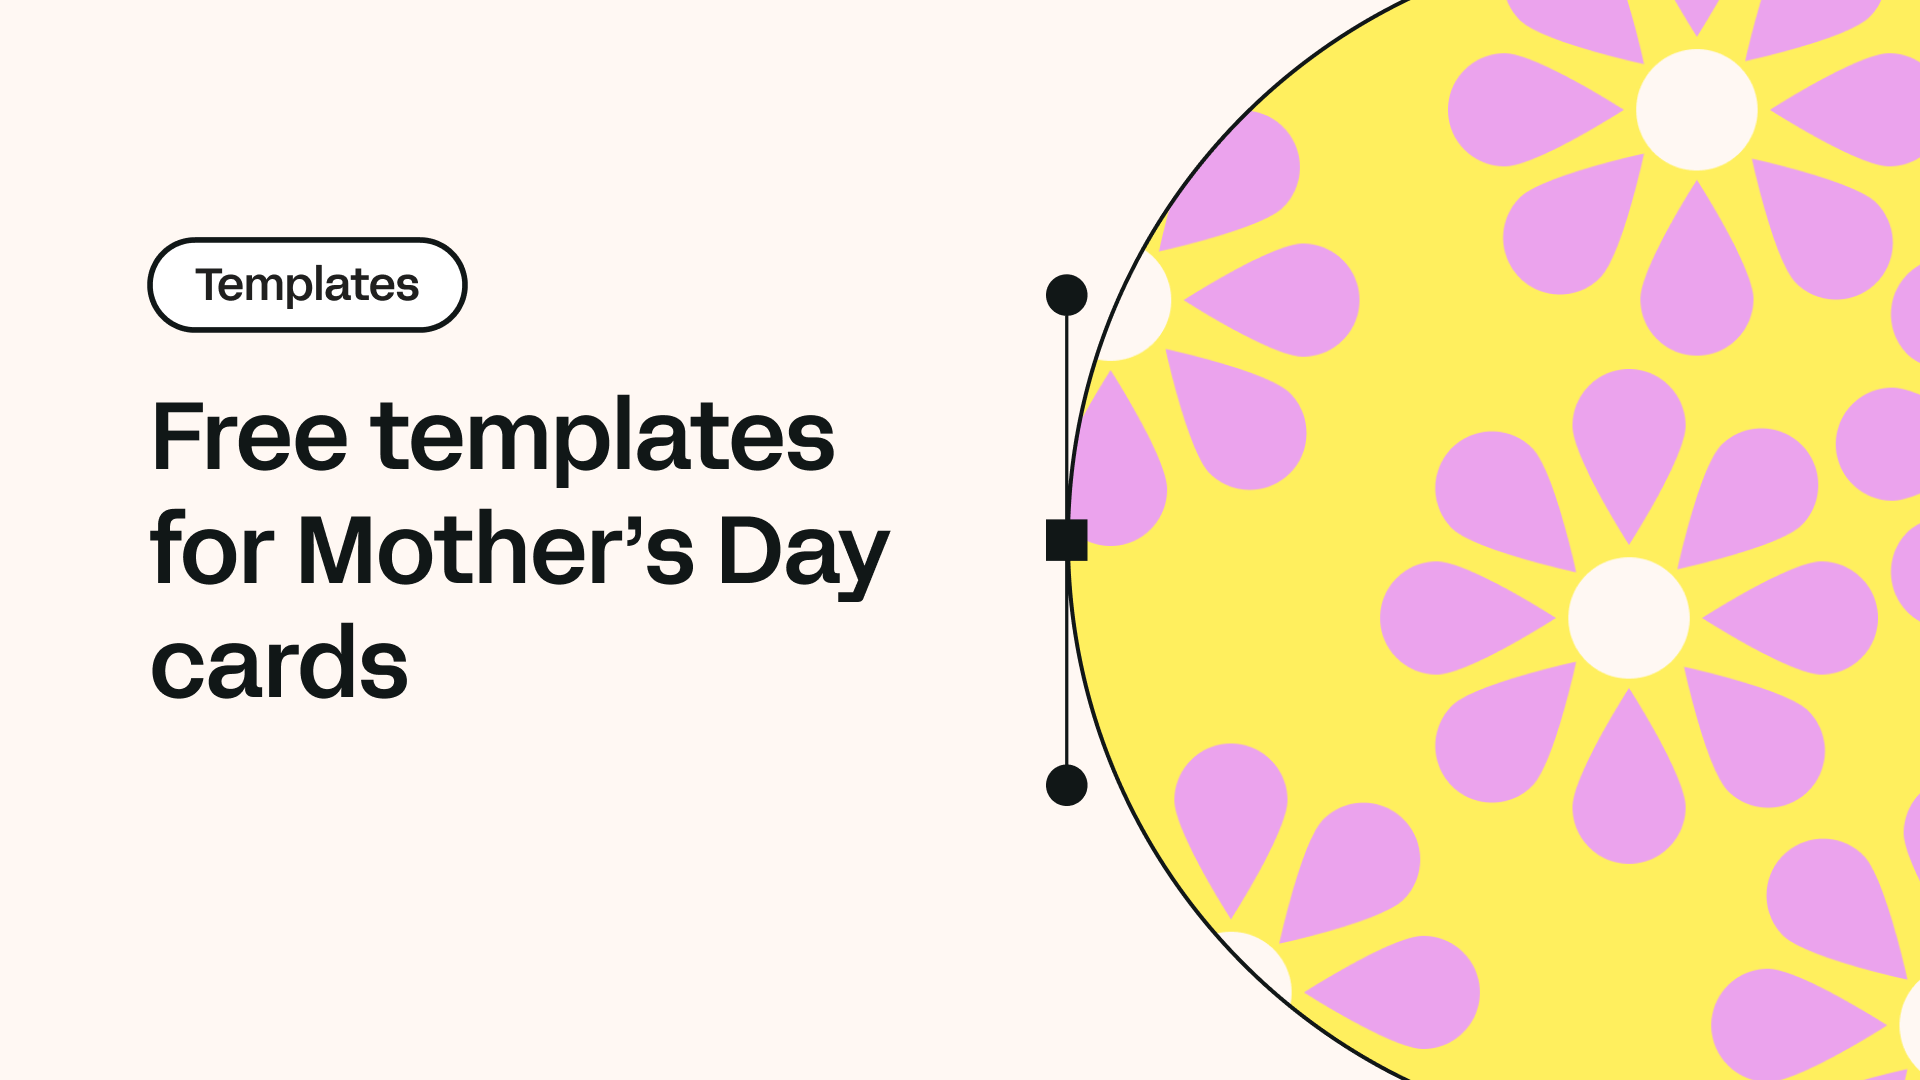 Free templates for Mother’s Day cards | Linearity